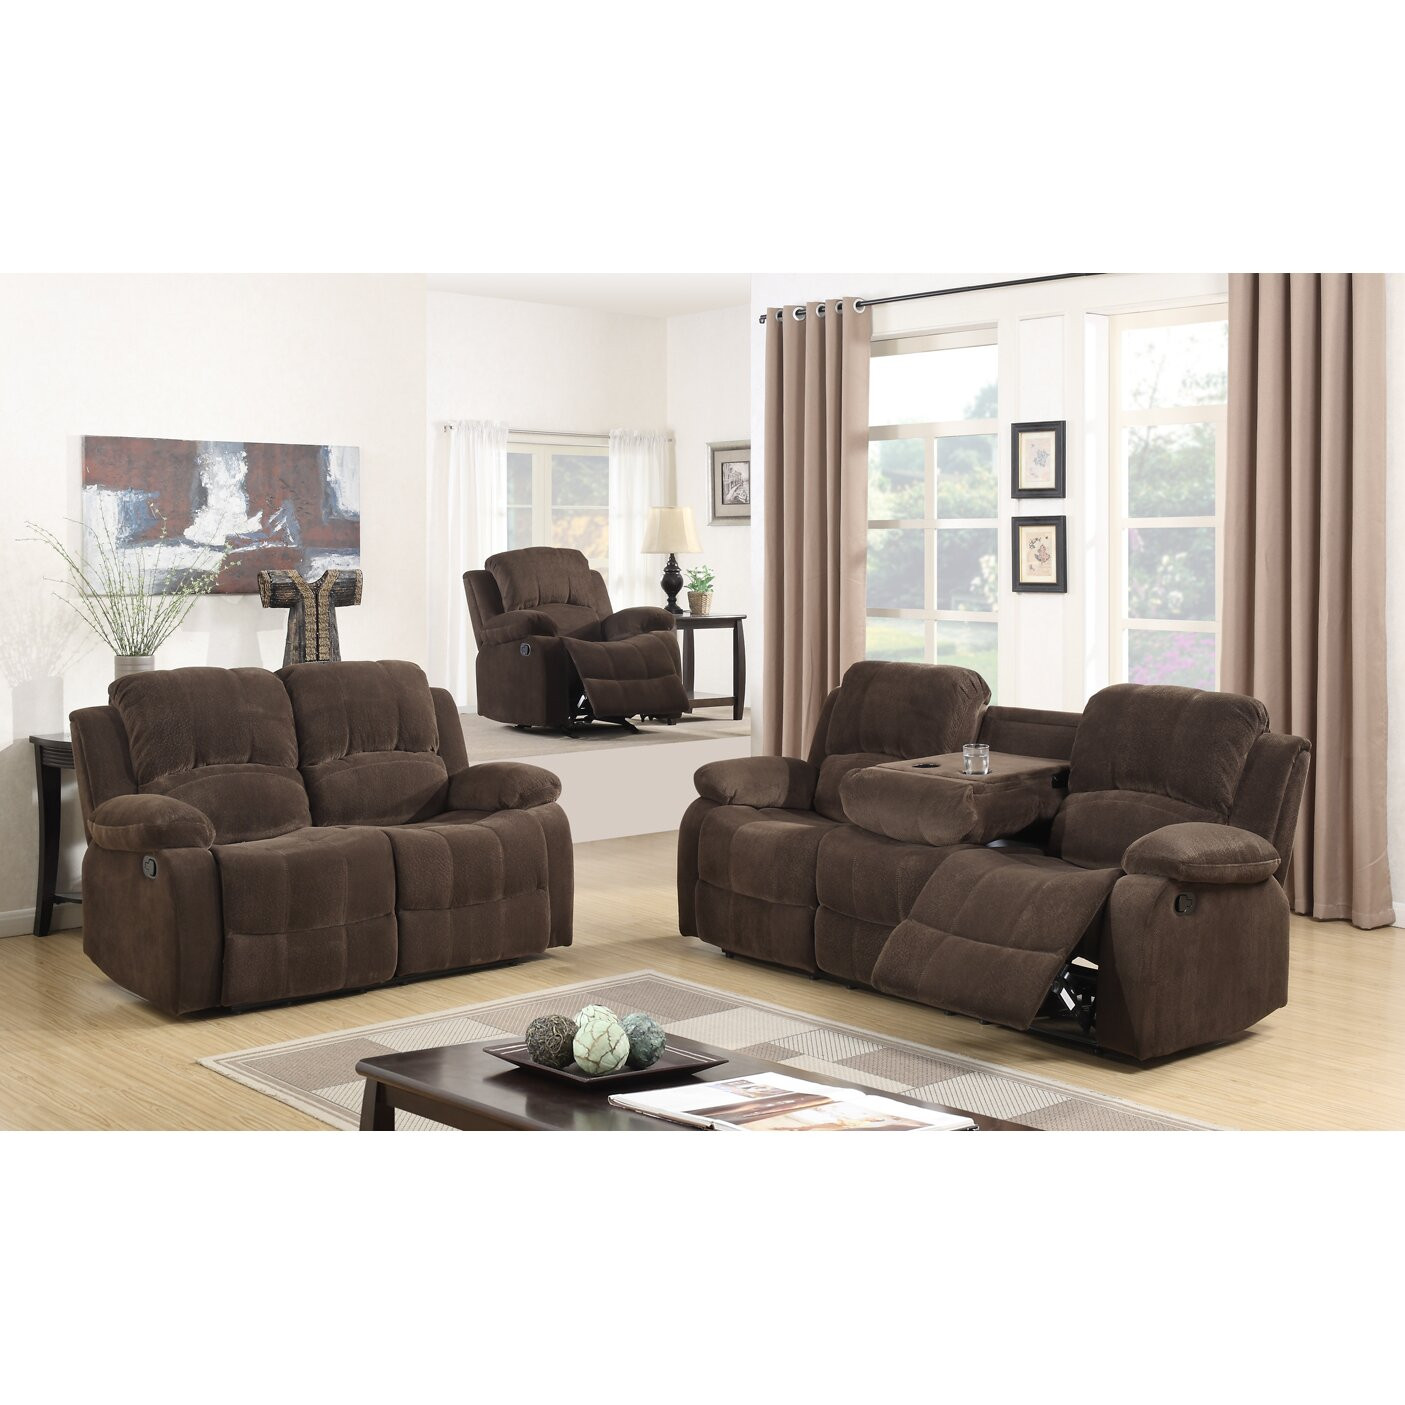 Living Room Chair Set
 Best Quality Furniture Fabric 3 Piece Recliner Living Room